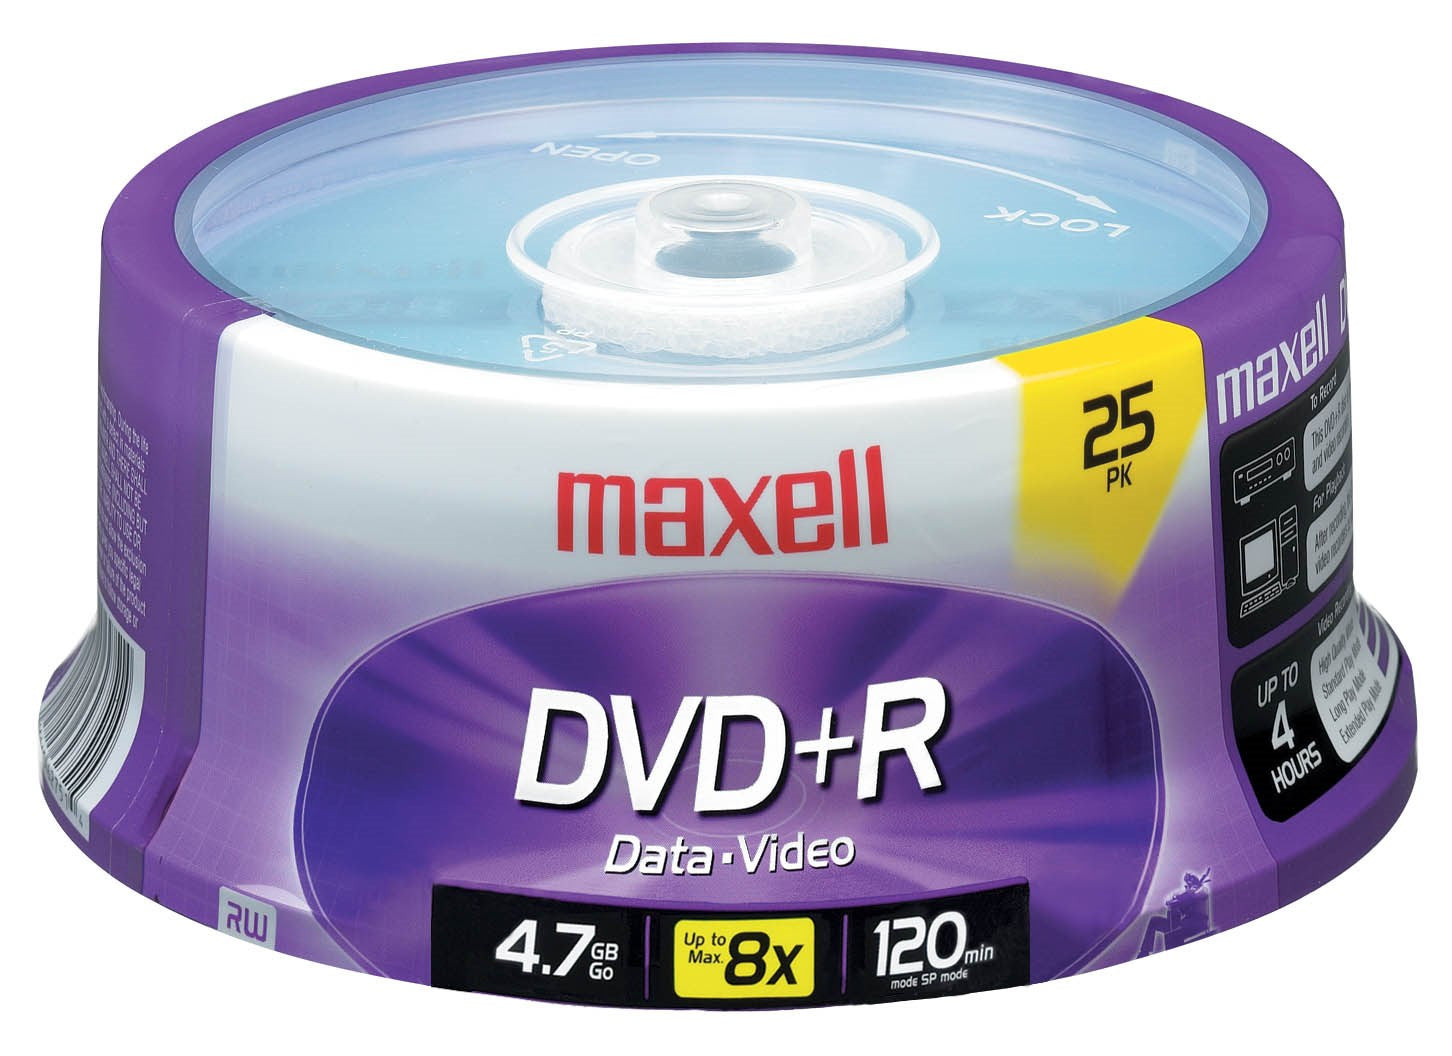 Maxell, Maxell 639011 DVD+R Spindle 4.7 GB 25 Count